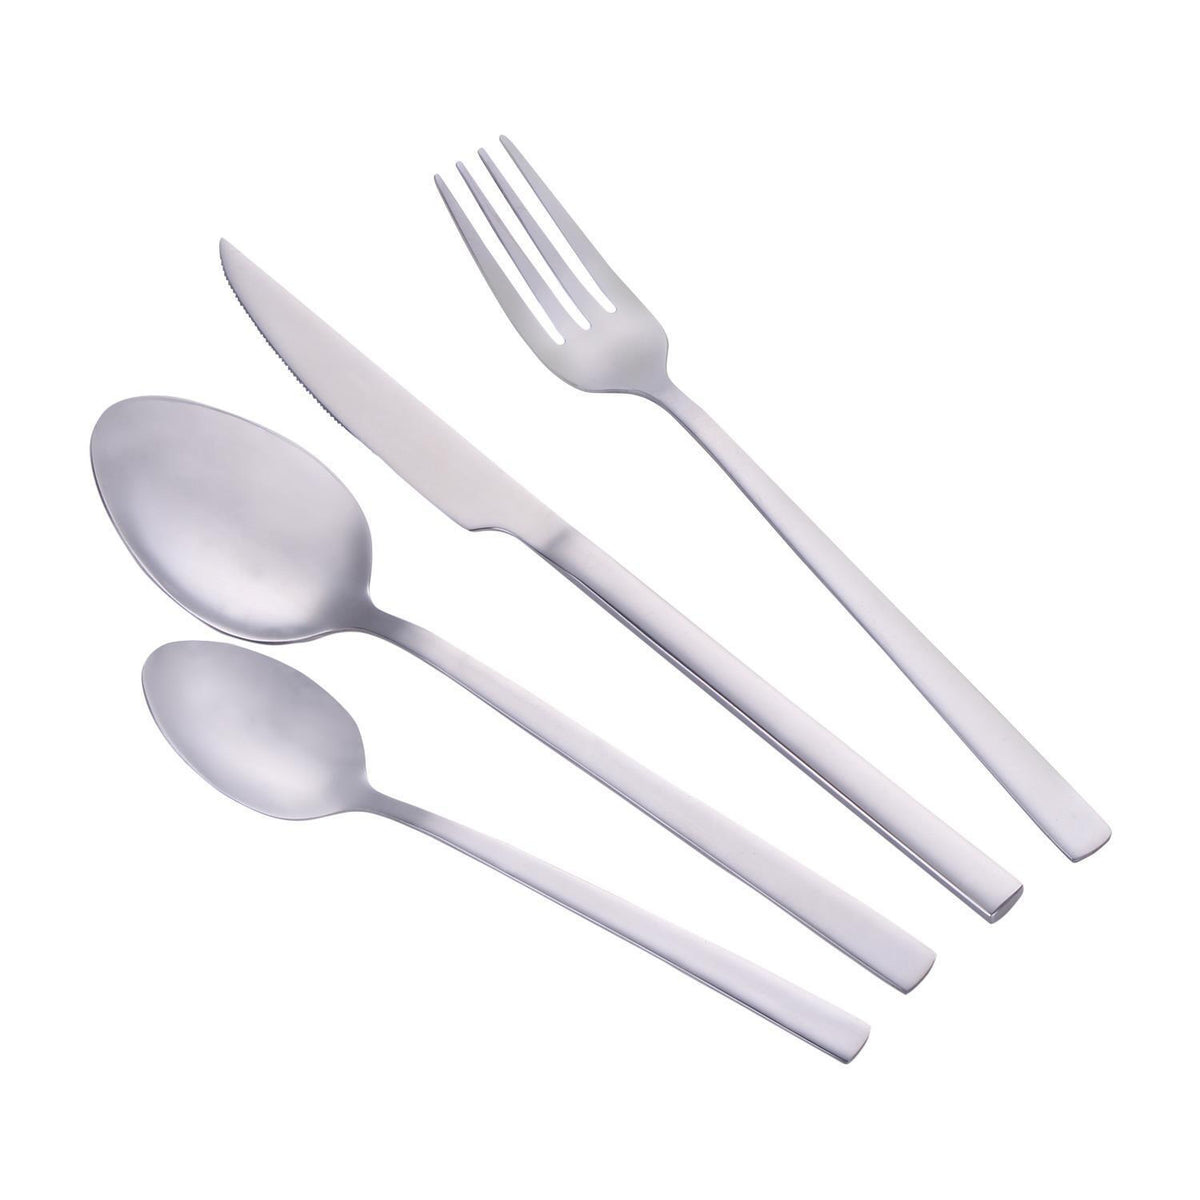 16-Piece Silver Stainless Steel Cutlery Set